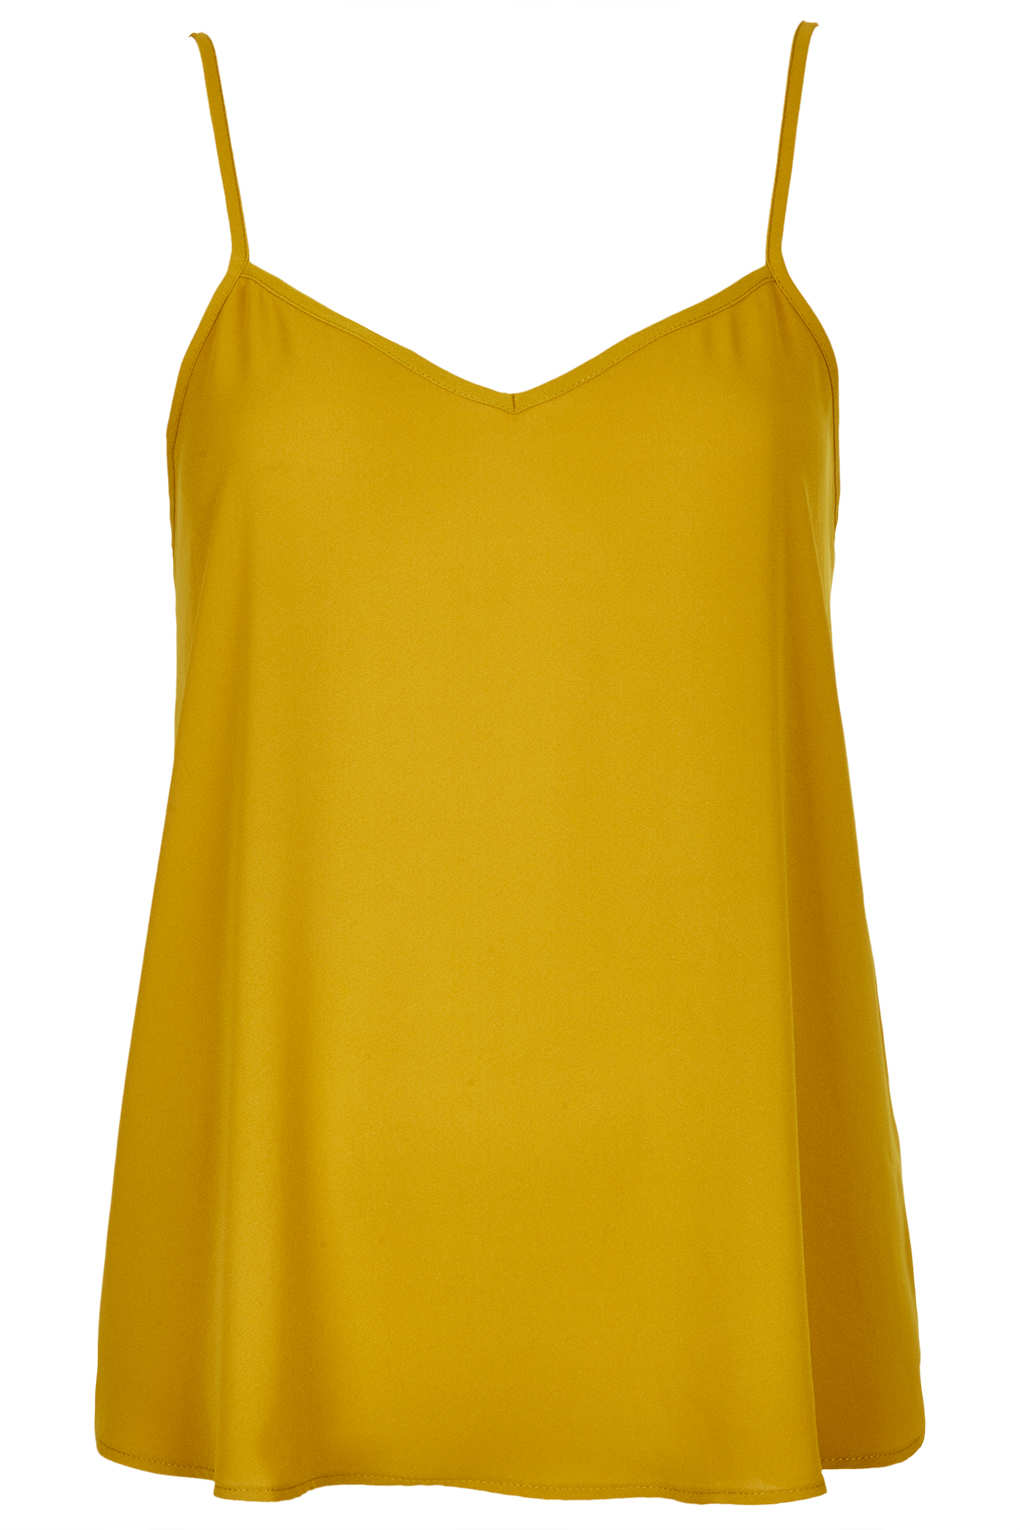 Lyst - Topshop Strappy V-neck Cami in Yellow